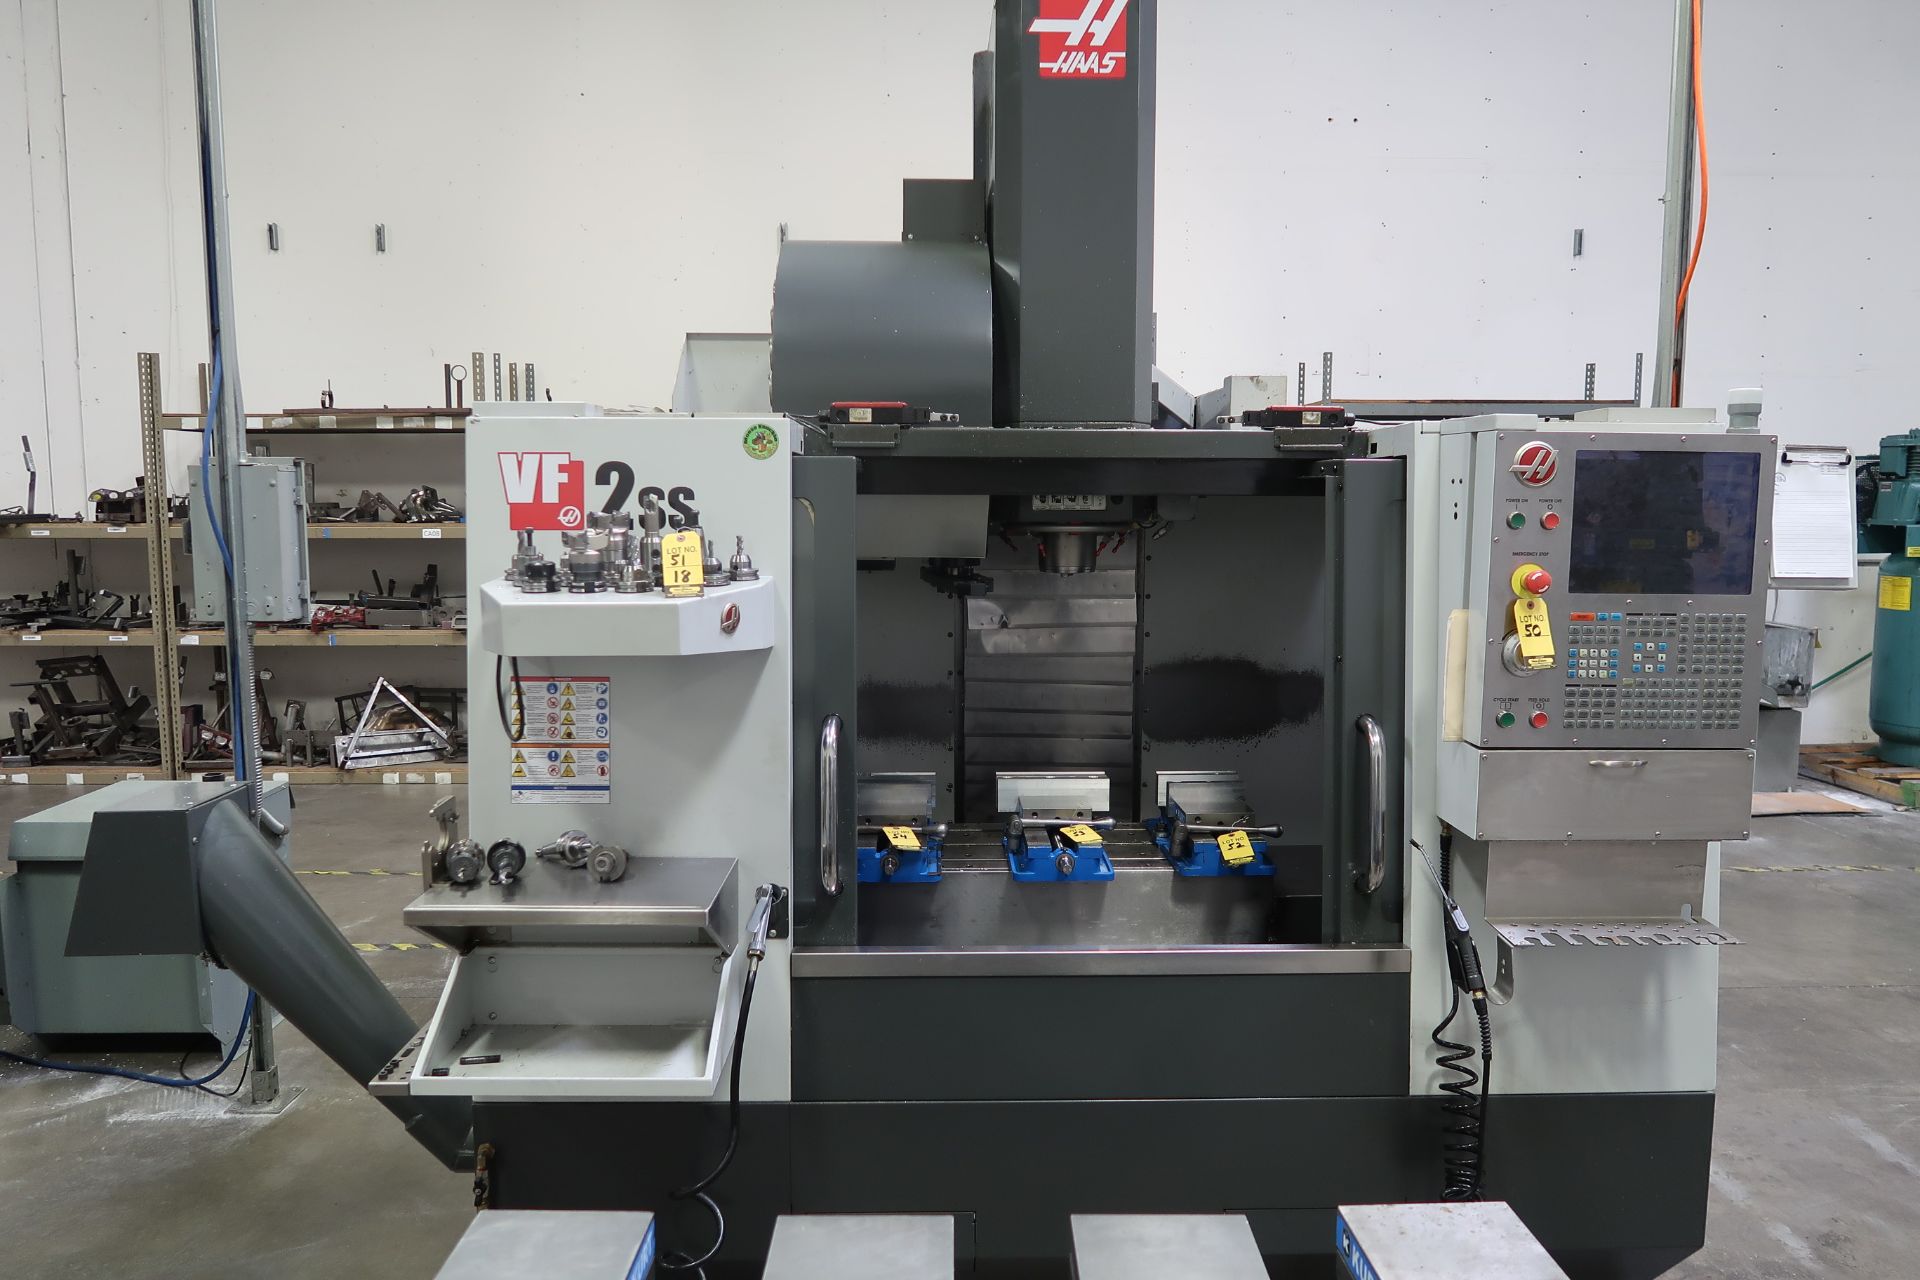 2014 HAAS VF-2SS CNC VERTICAL MACHINING CENTER, 4TH AXIS READY, CHIP AUGER, PROGRAMMABLE COOLANT, 24